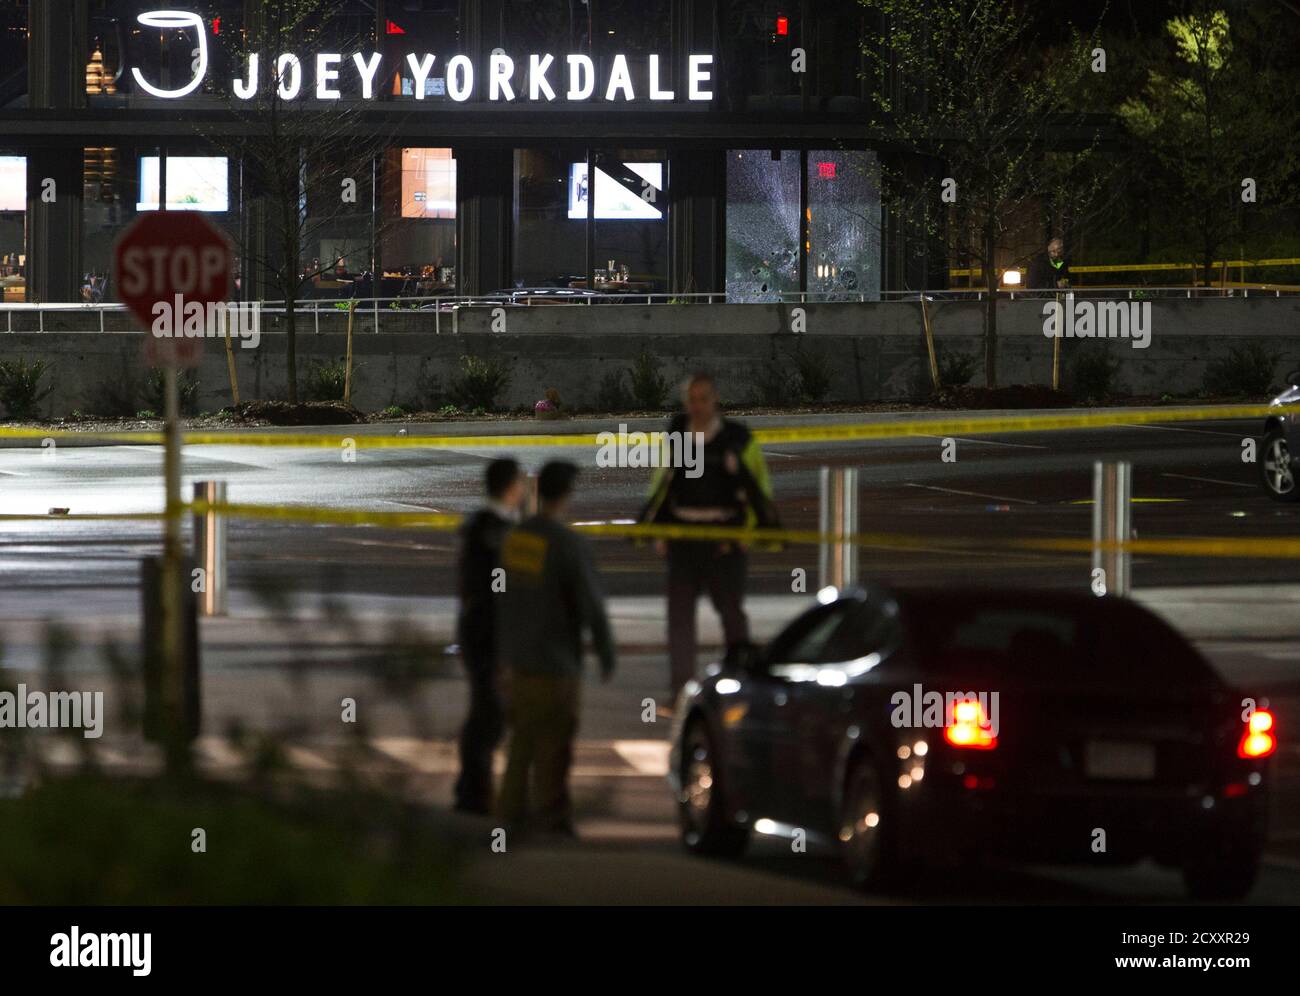 Security guards and police officers stand in front of the Joey Yorkdale restaurant where gunshots were fired at the Yorkdale shopping mall in Toronto May 11, 2013. One man has been sent to a local hospital with injuries following the incident, local media said.  REUTERS/Mark Blinch (CANADA - Tags: CRIME LAW BUSINESS) Stock Photo